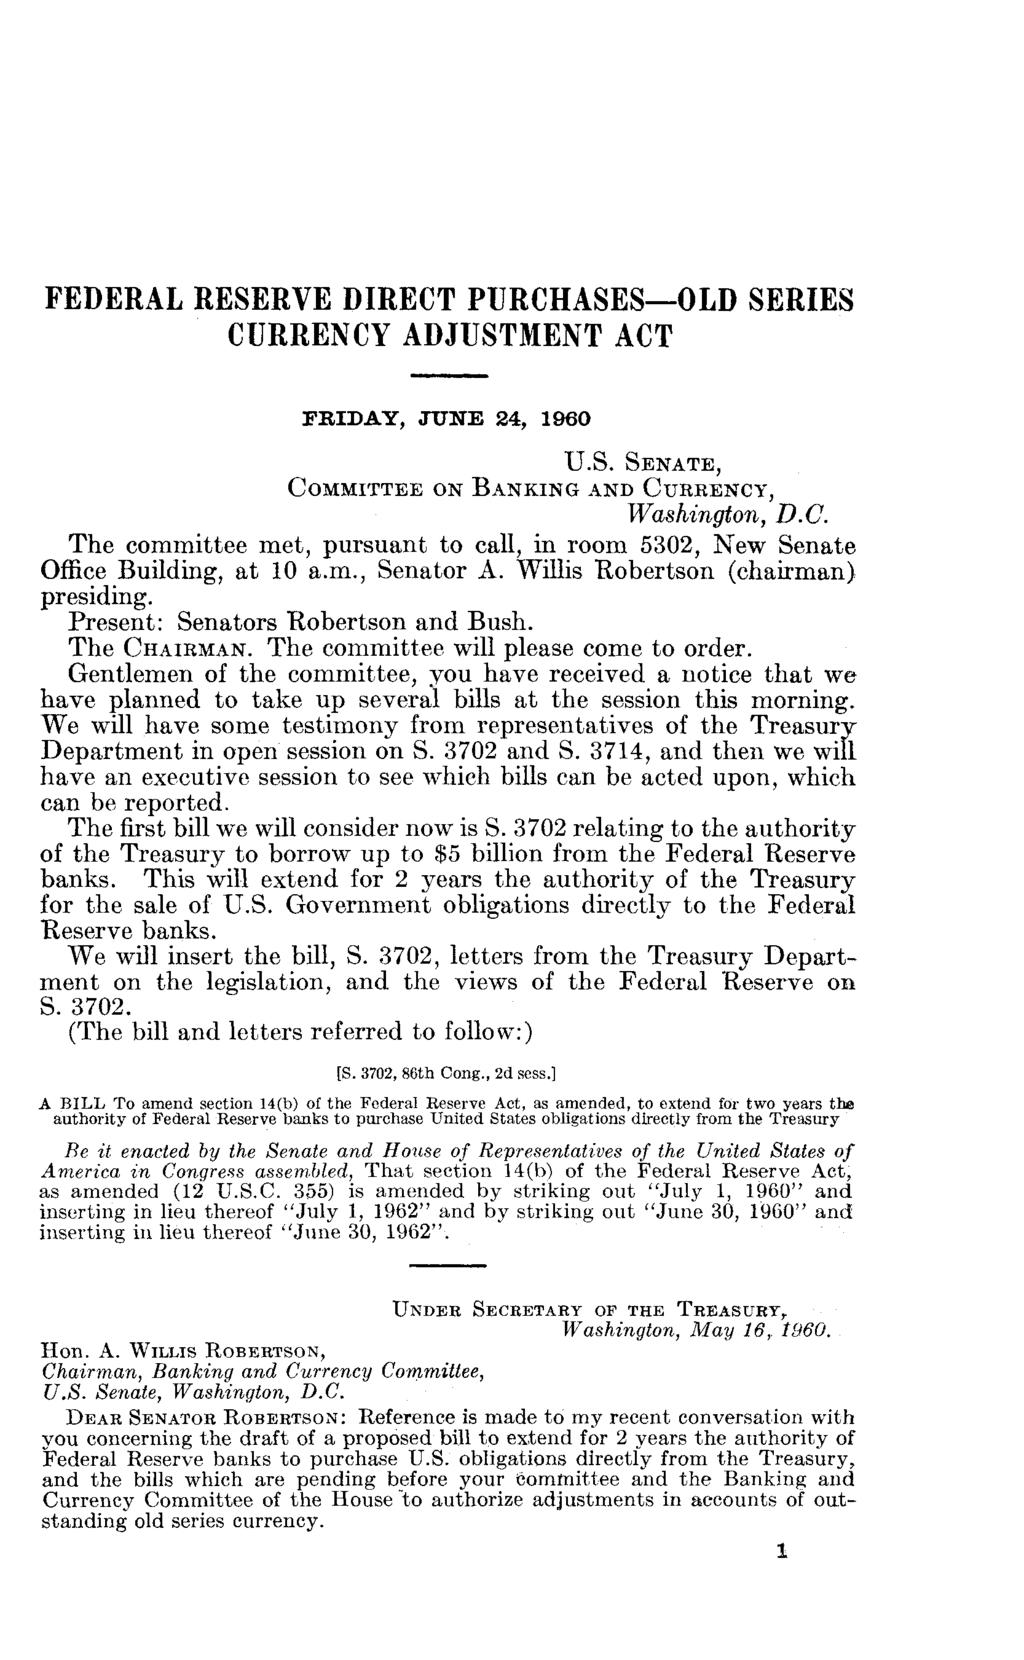 FEDERAL RESERVE DIRECT PURCHASES OLD SERIES CURRENCY ADJUSTMENT ACT FRIDAY, JUNE 24, 1960 U.S. SENATE, COMMITTEE ON BANKING AND CURRENCY, Washington, B.C. The committee met, pursuant to call, in room 5302, New Senate Office Building, at 10 a.